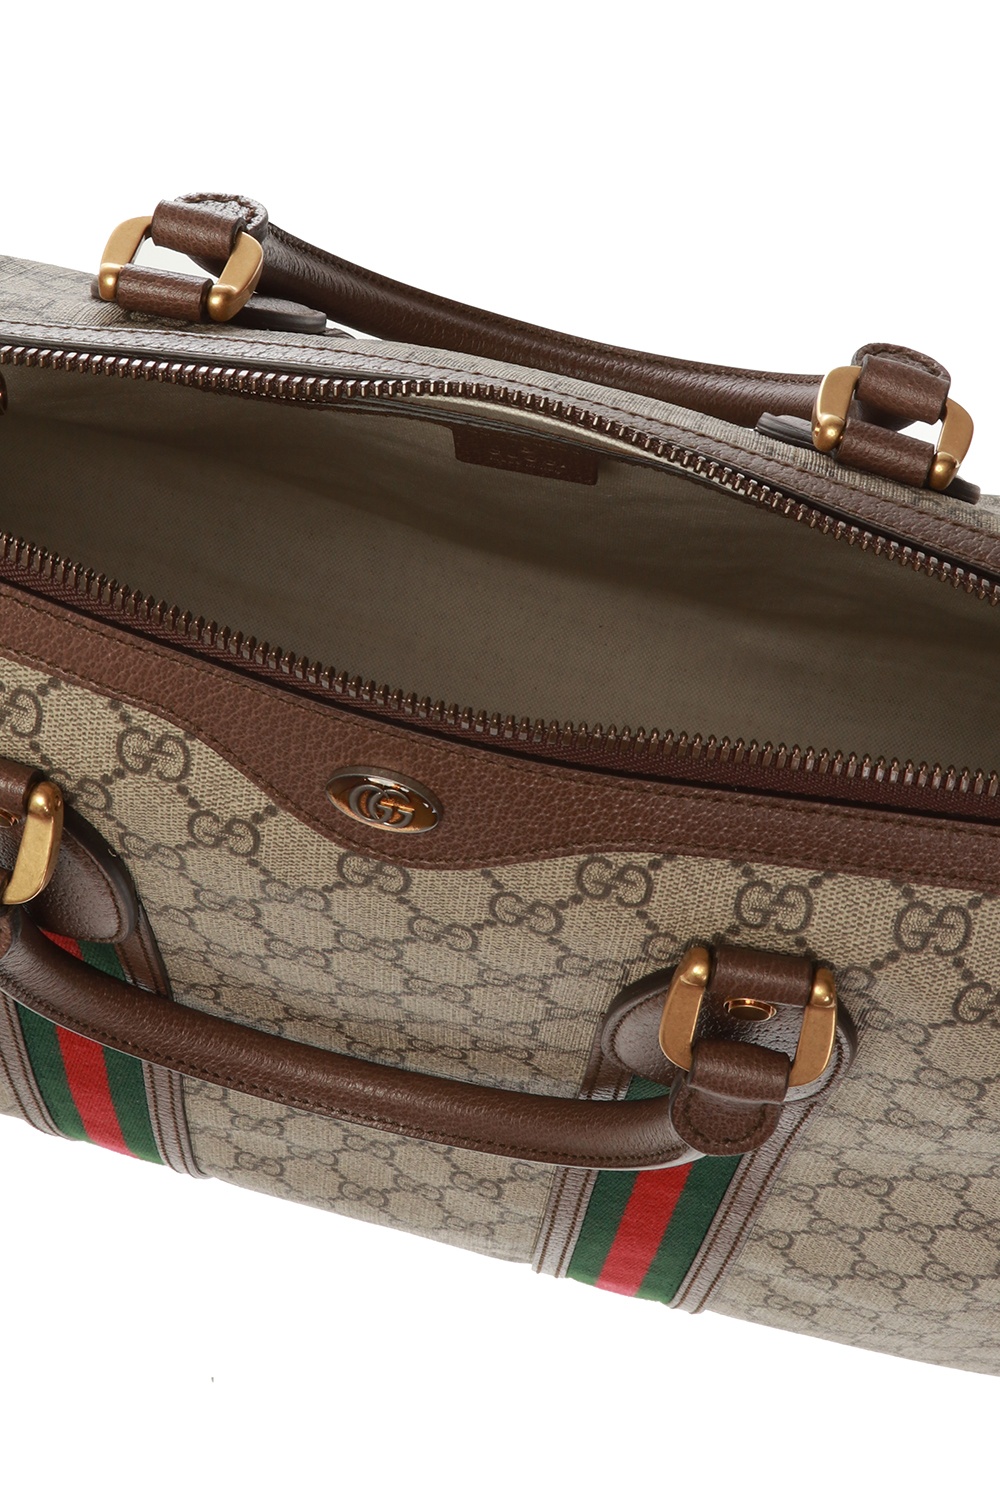 Gucci ‘Ophidia’ holdall bag